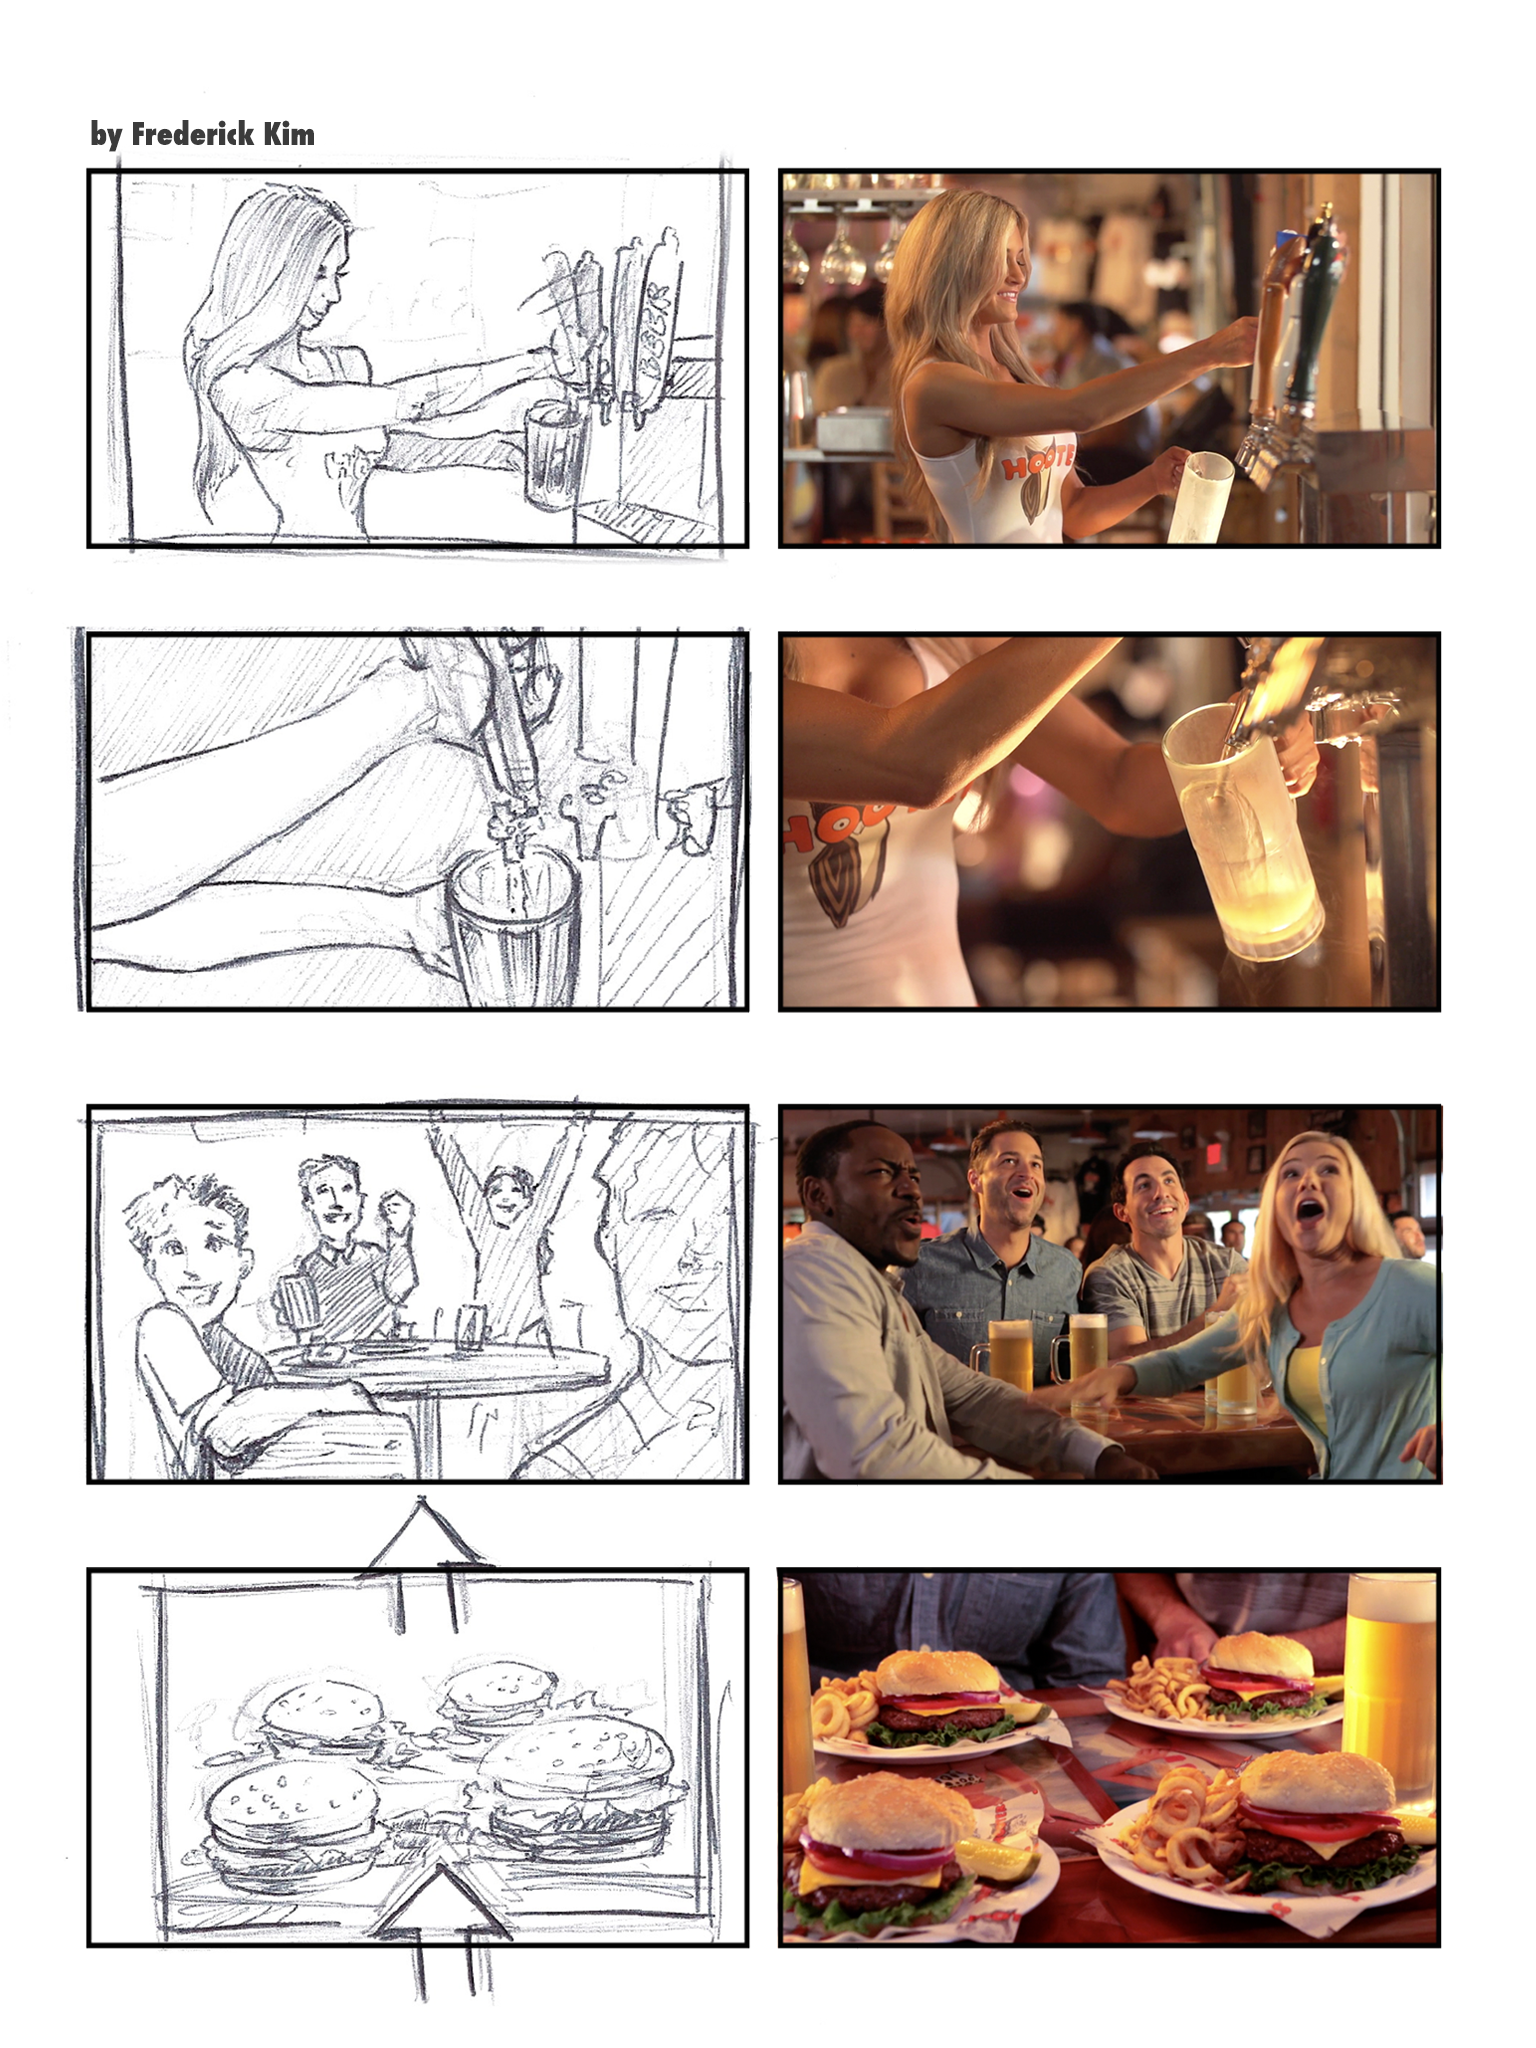 "Here's another rushed storyboard I drew. We filmed this one at the original Hooters in Florida."